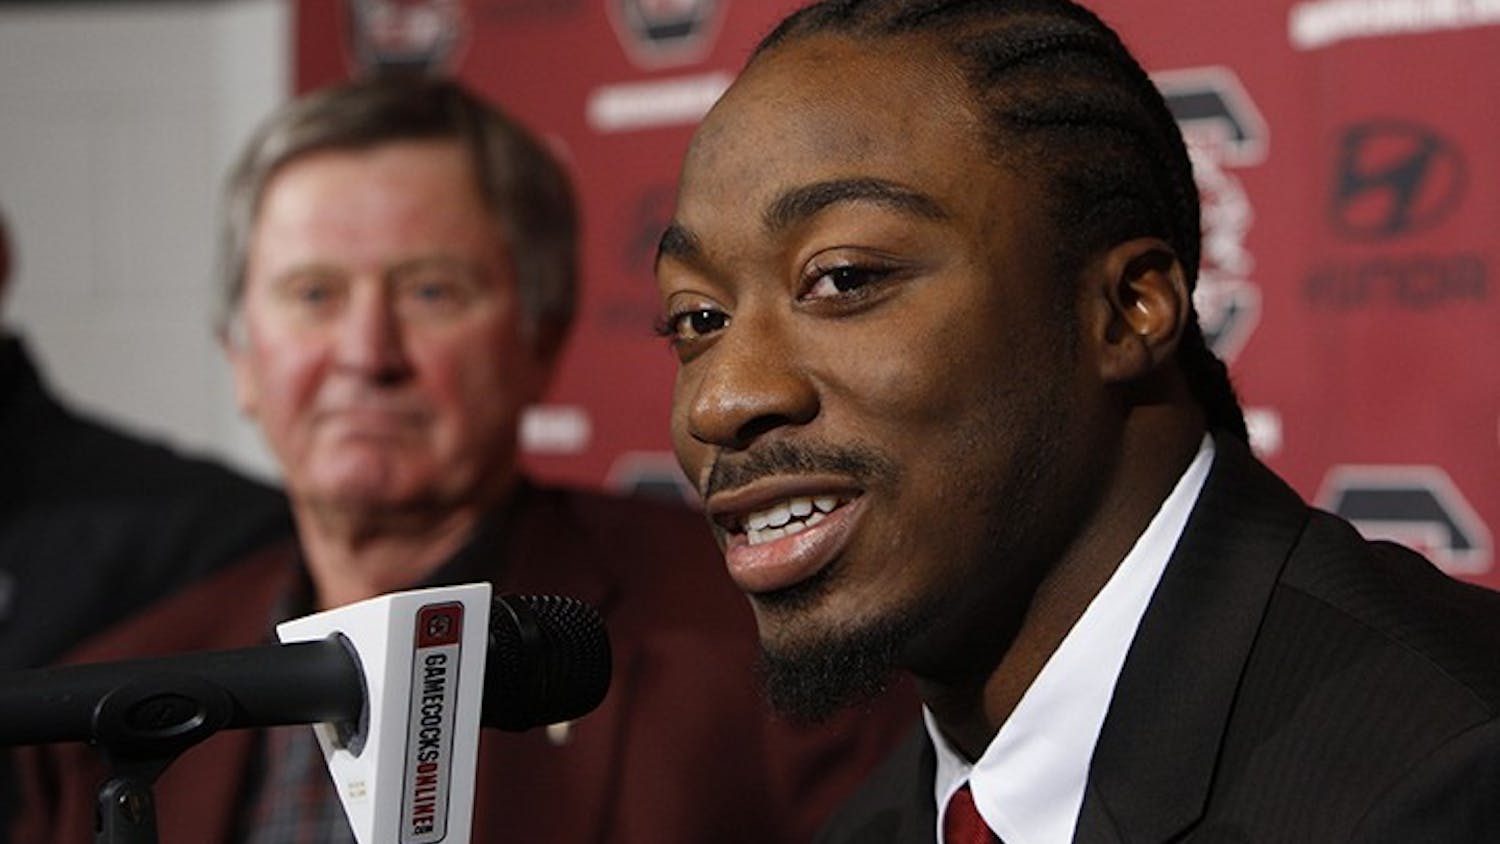 University of South Carolina running back Marcus Lattimore announces Wednesday, December 12, 2012, his intentions to enter the NFL draft during a press conference in Columbia, South Carolina. (Tim Dominick/The State/MCT)